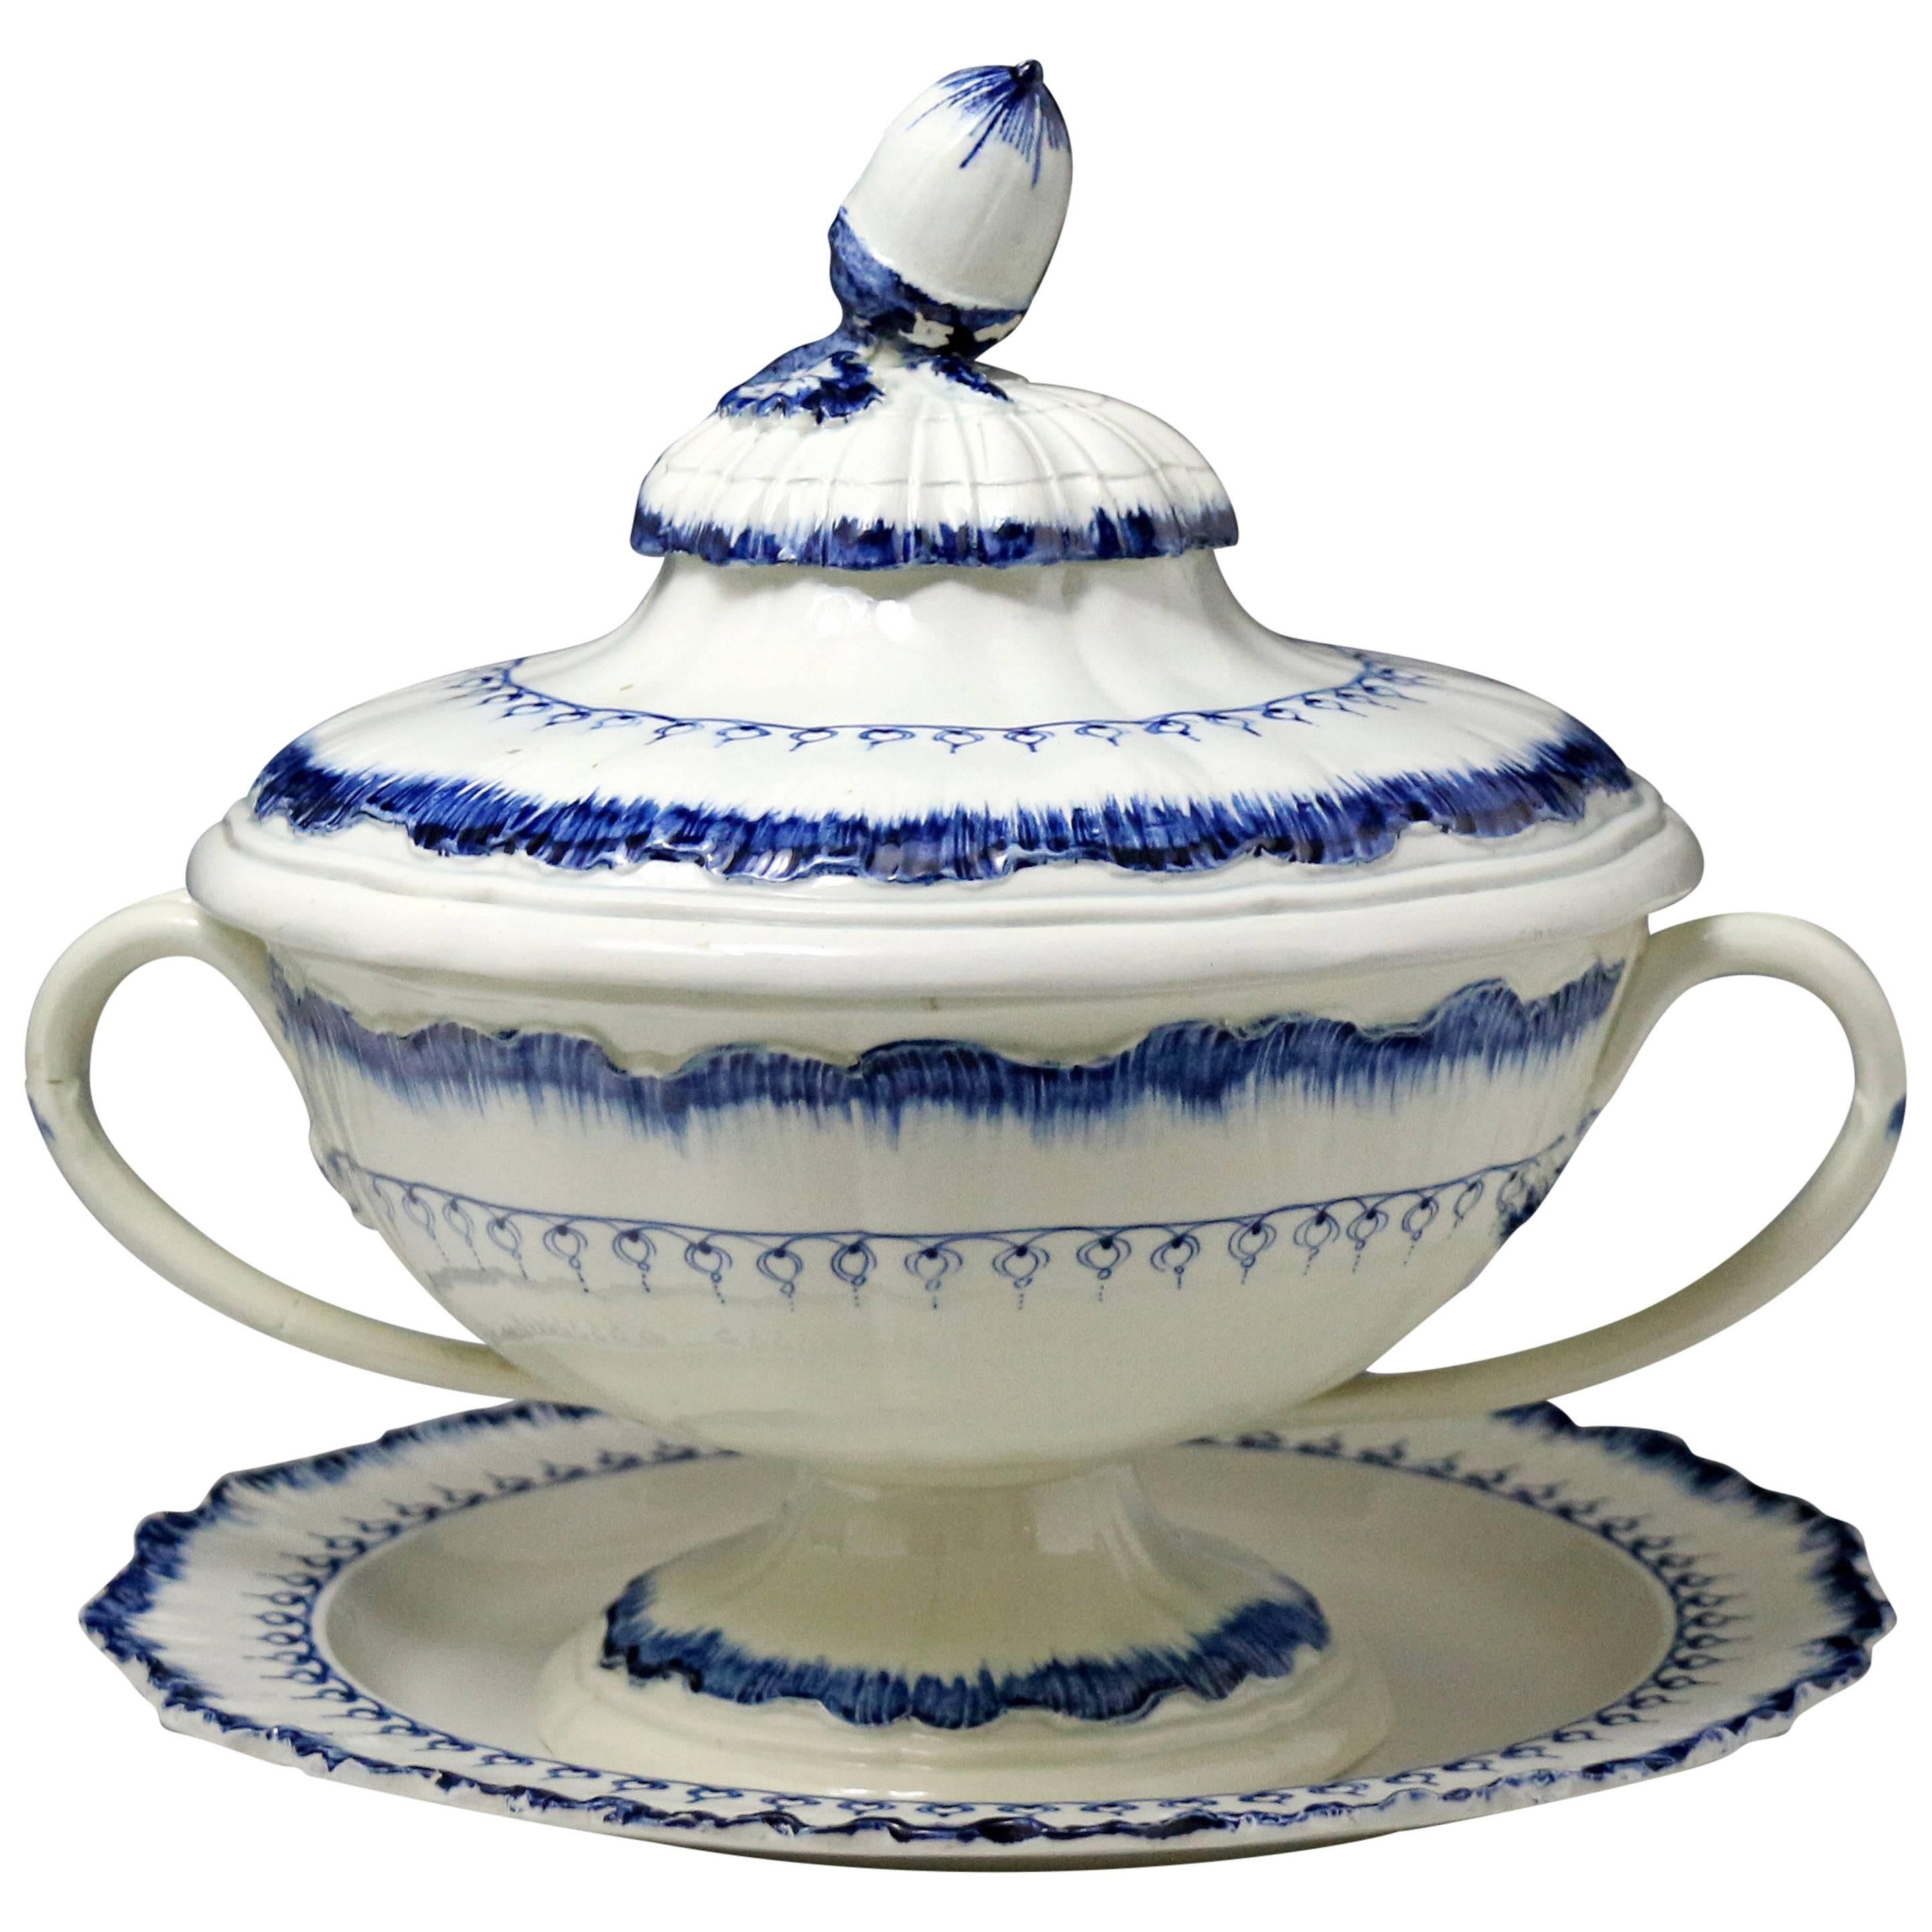 Wedgwood Pearlware Blue and White Painted Tureen, Early 19th Century